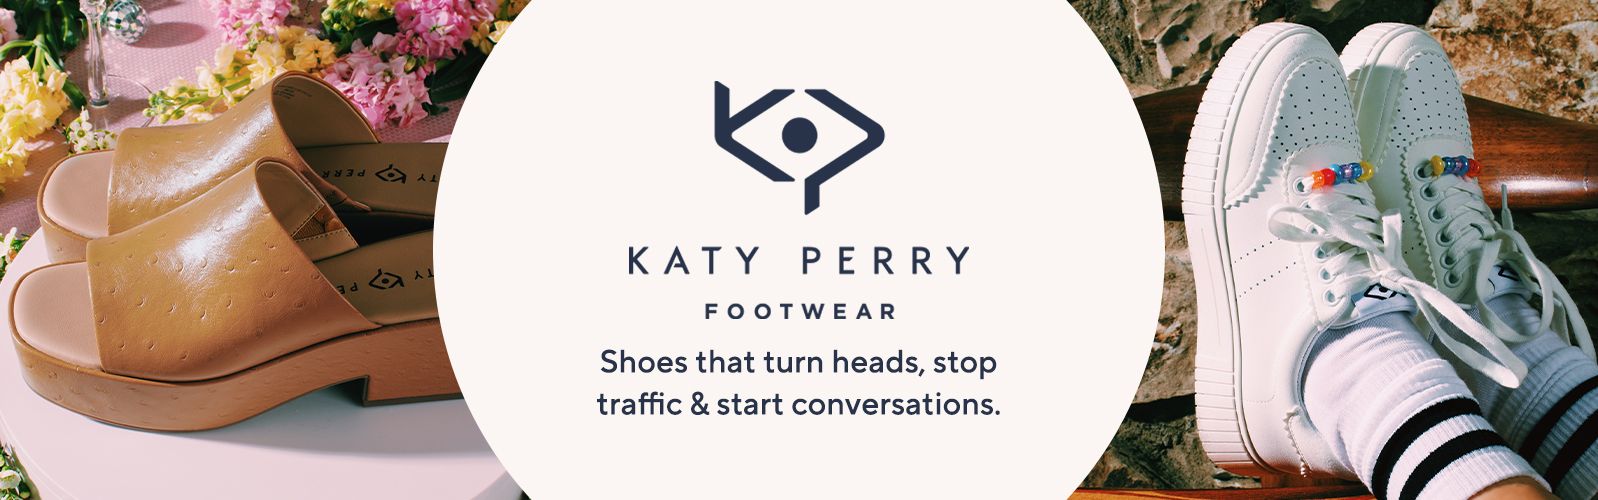 The Katy Perry Footwear Collection. Shoes that turn heads, stop traffic & start conversations.